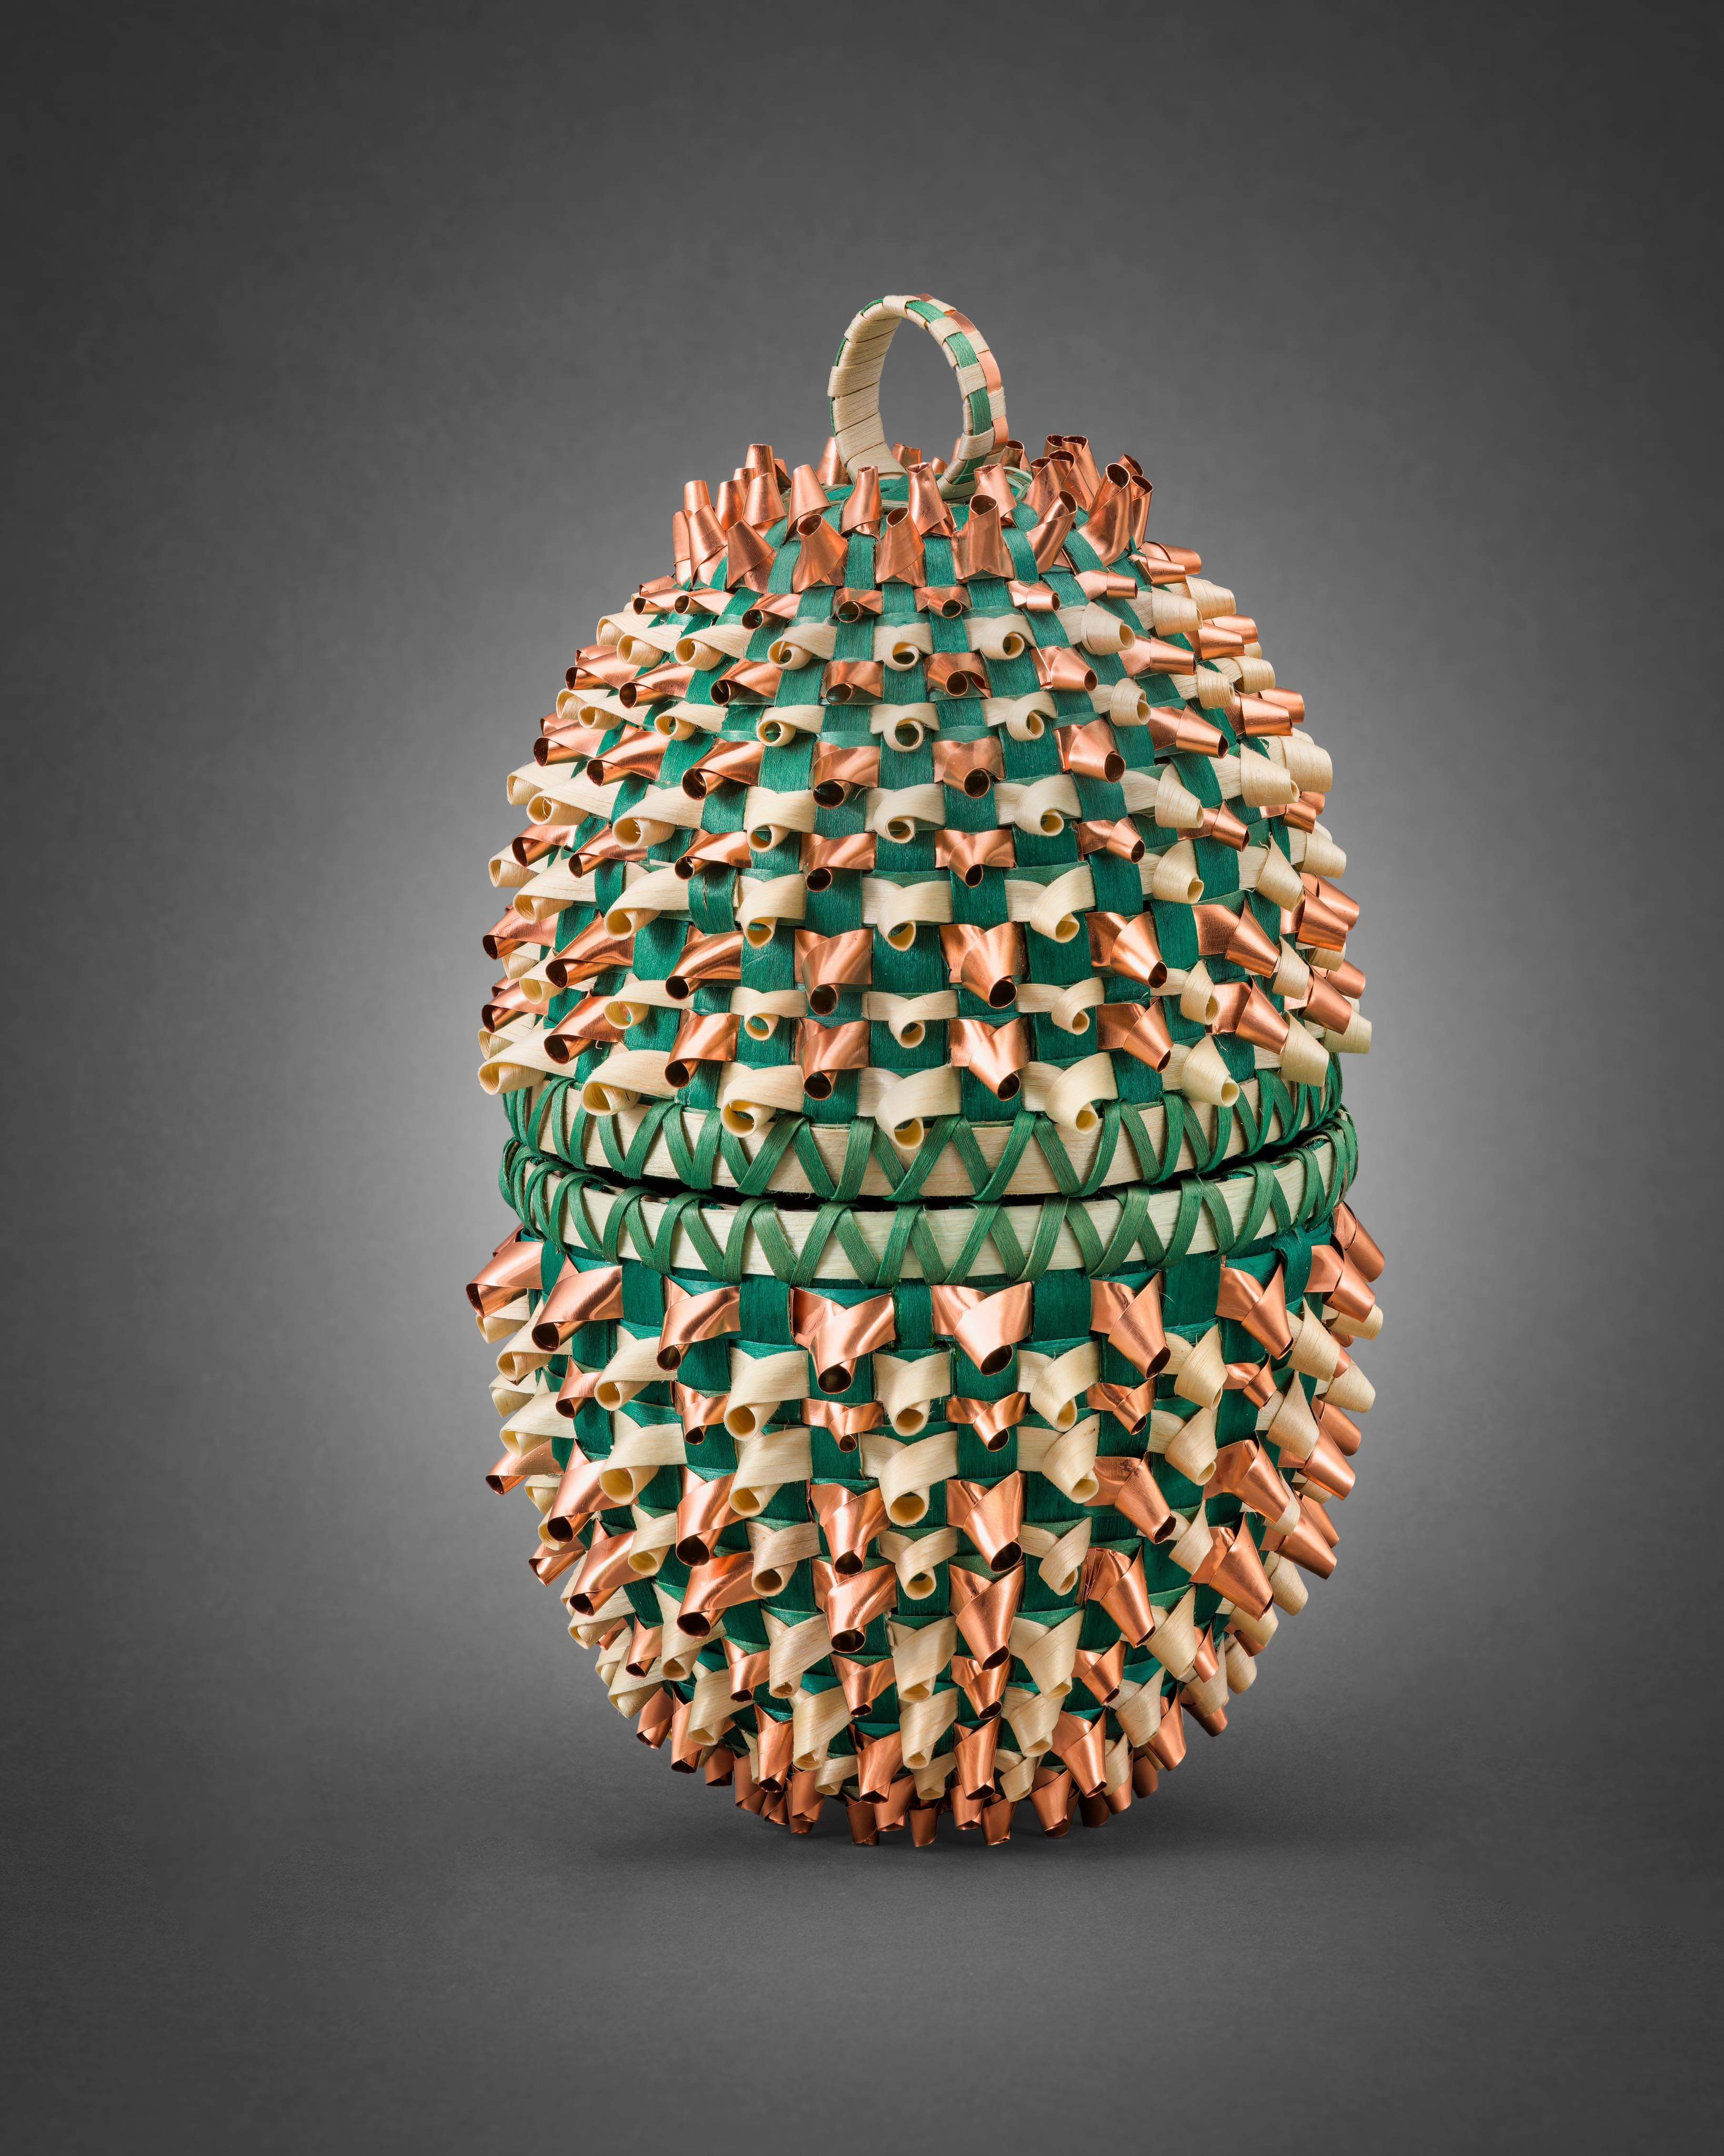 A woven basket with green, copper, and bronze-colored features